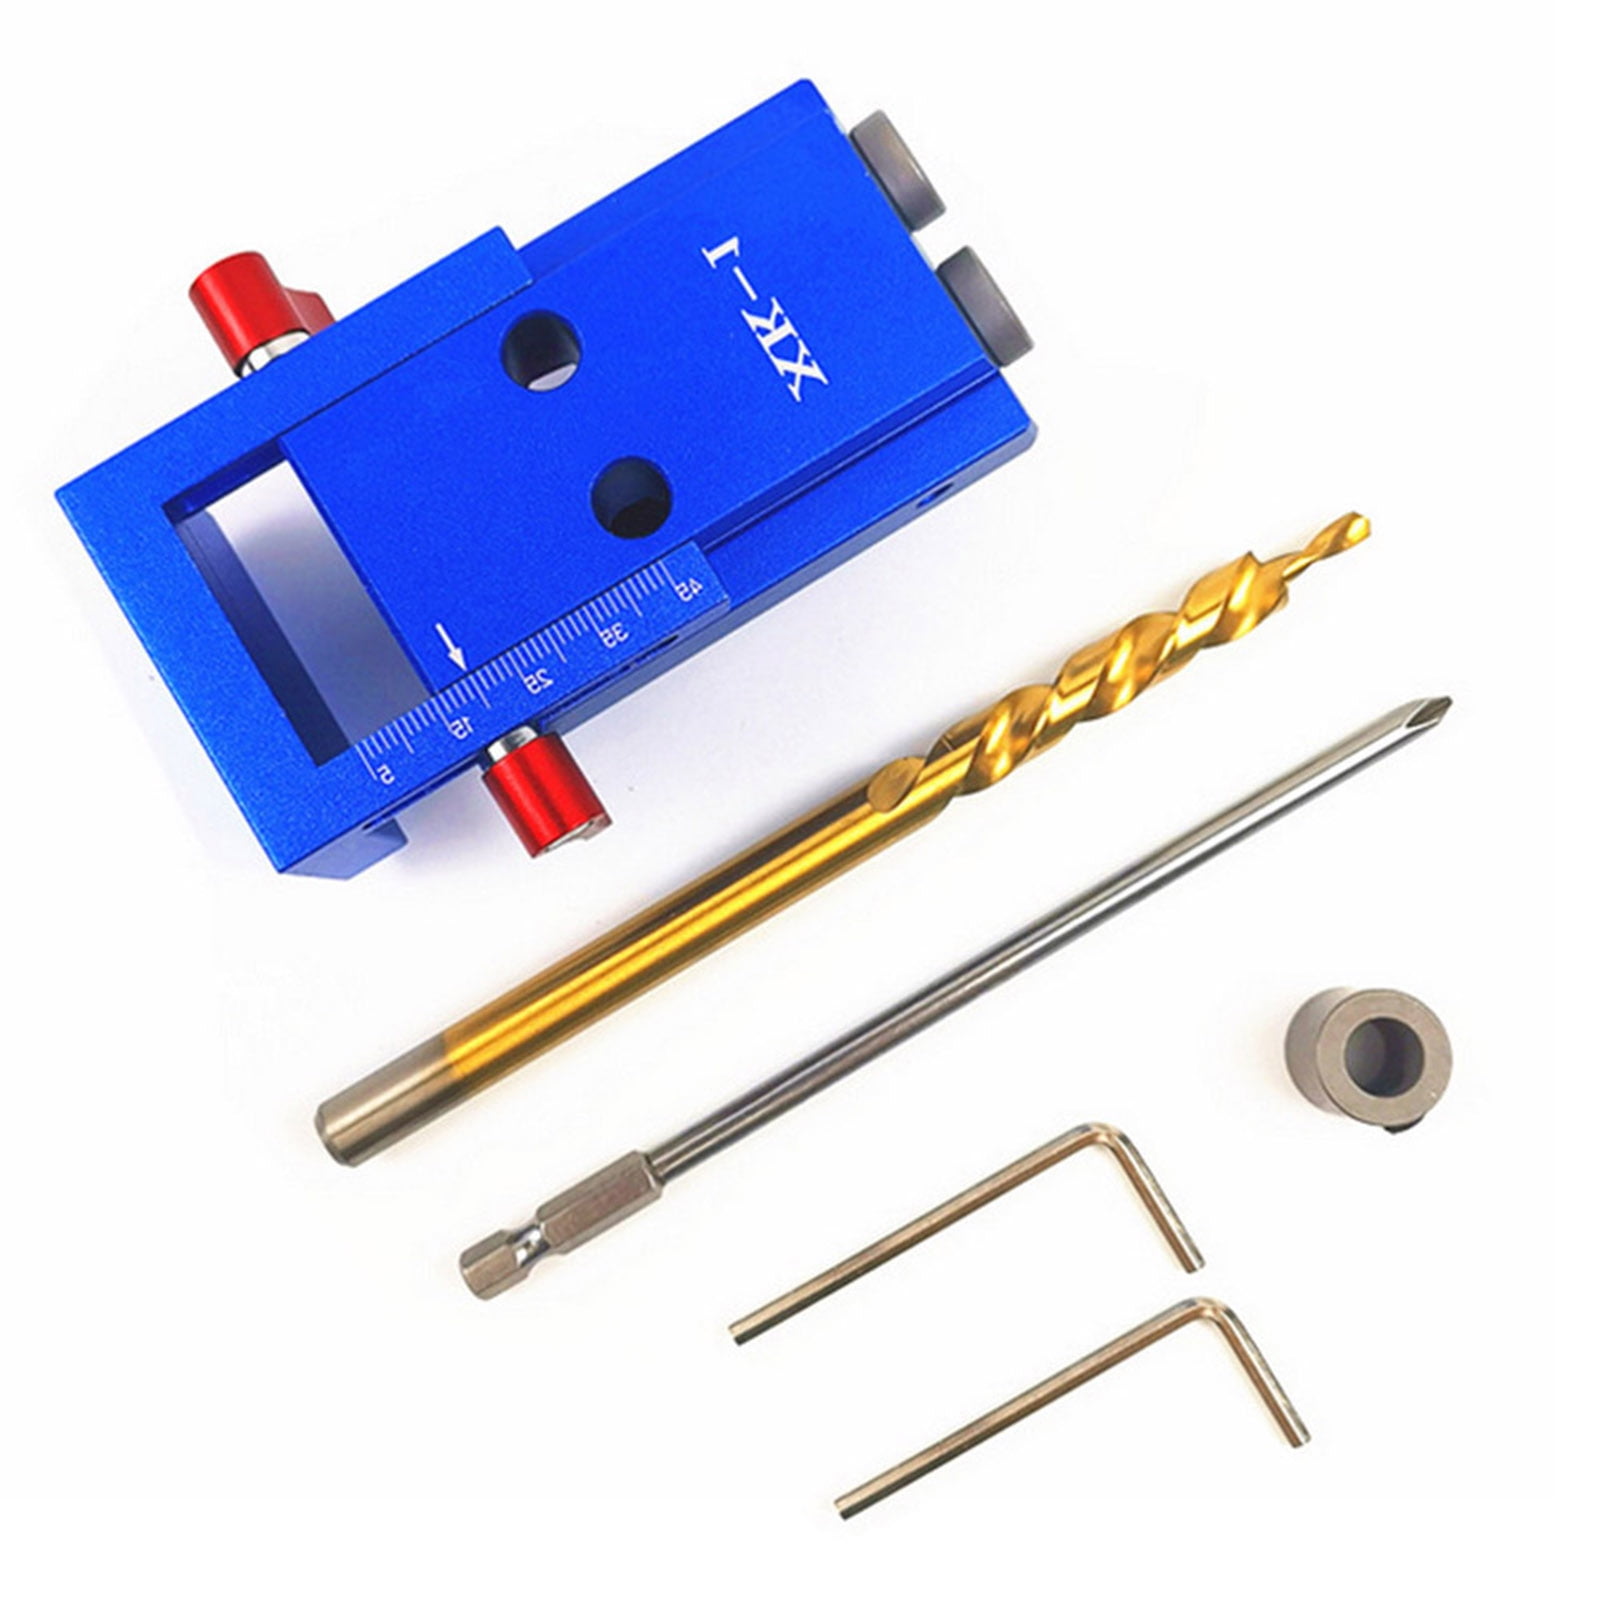 105402 Katsu Pocket Hole Drilling Jig Kit With Step Bit Woodworking Joinery  Tool - Woodworking Machinery Parts - AliExpress